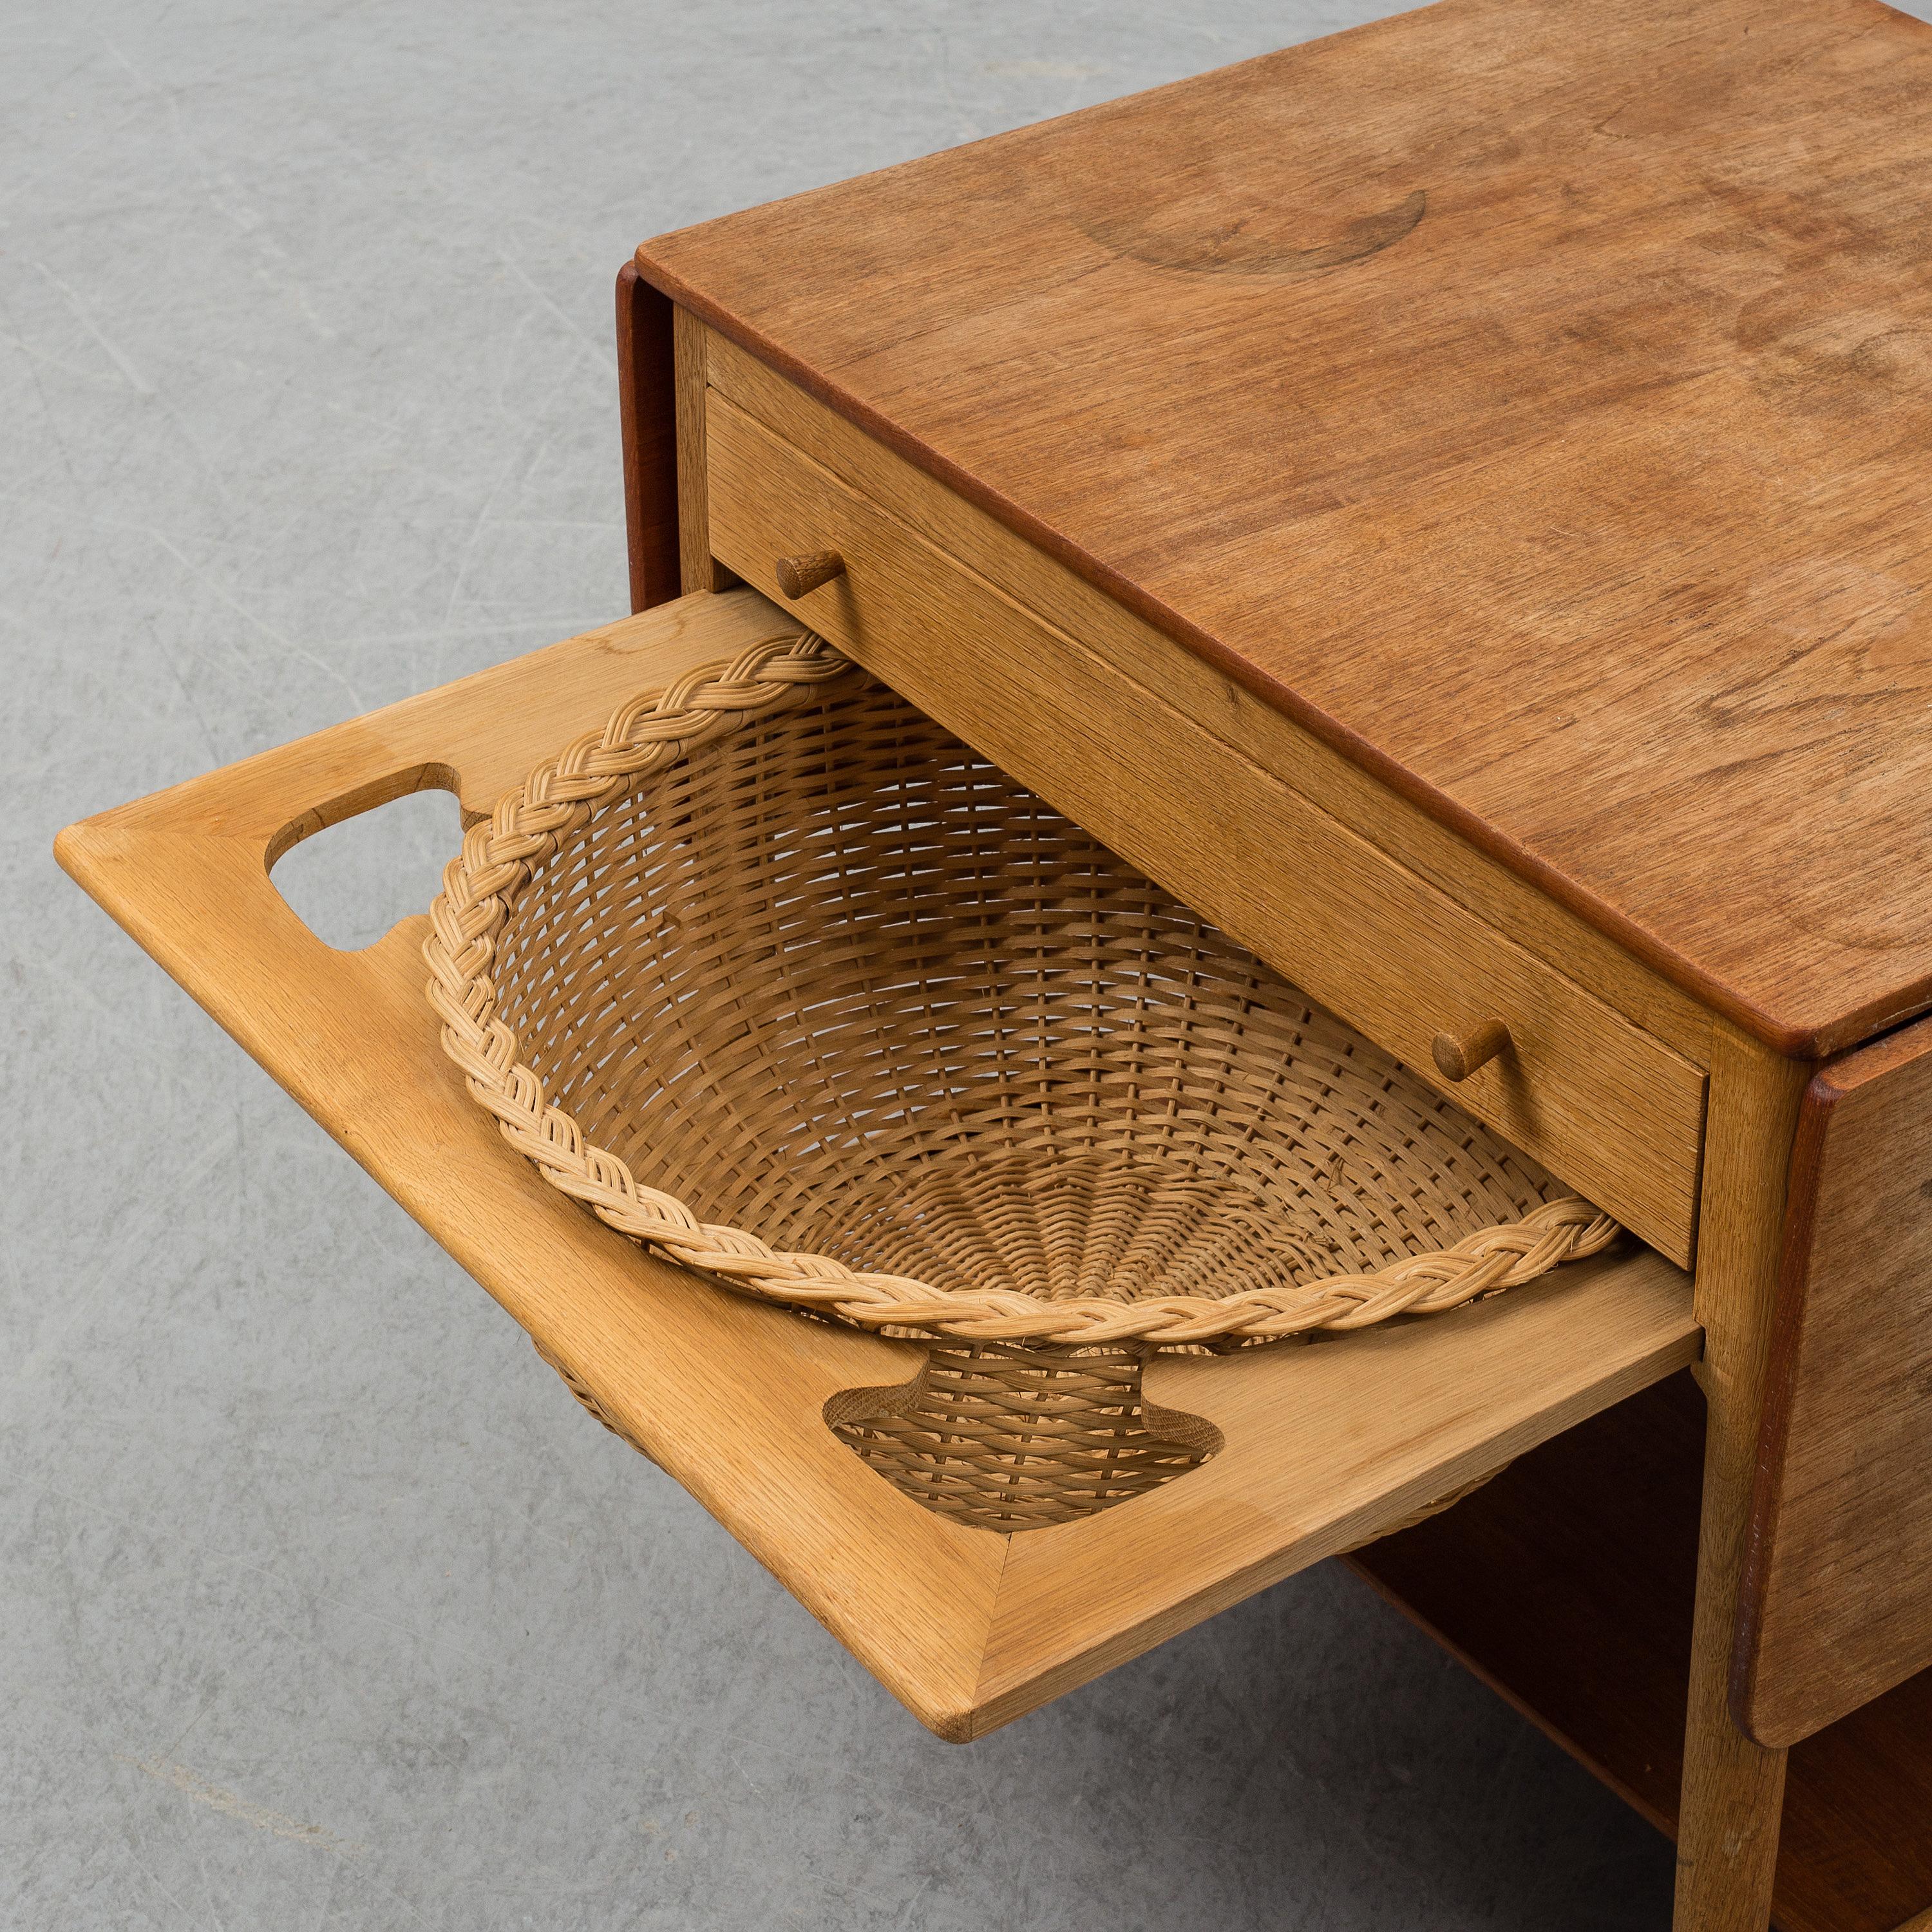 Sewing table AT-33 by Hans J Wegner, made by Andreas Tuck, Denmark, circa 1950s. This solid oak sewing table, designed by Hans J Wegner and made by cabinetmaker Andreas Tuck. The table features two flaps, a front drawer with several compartments and